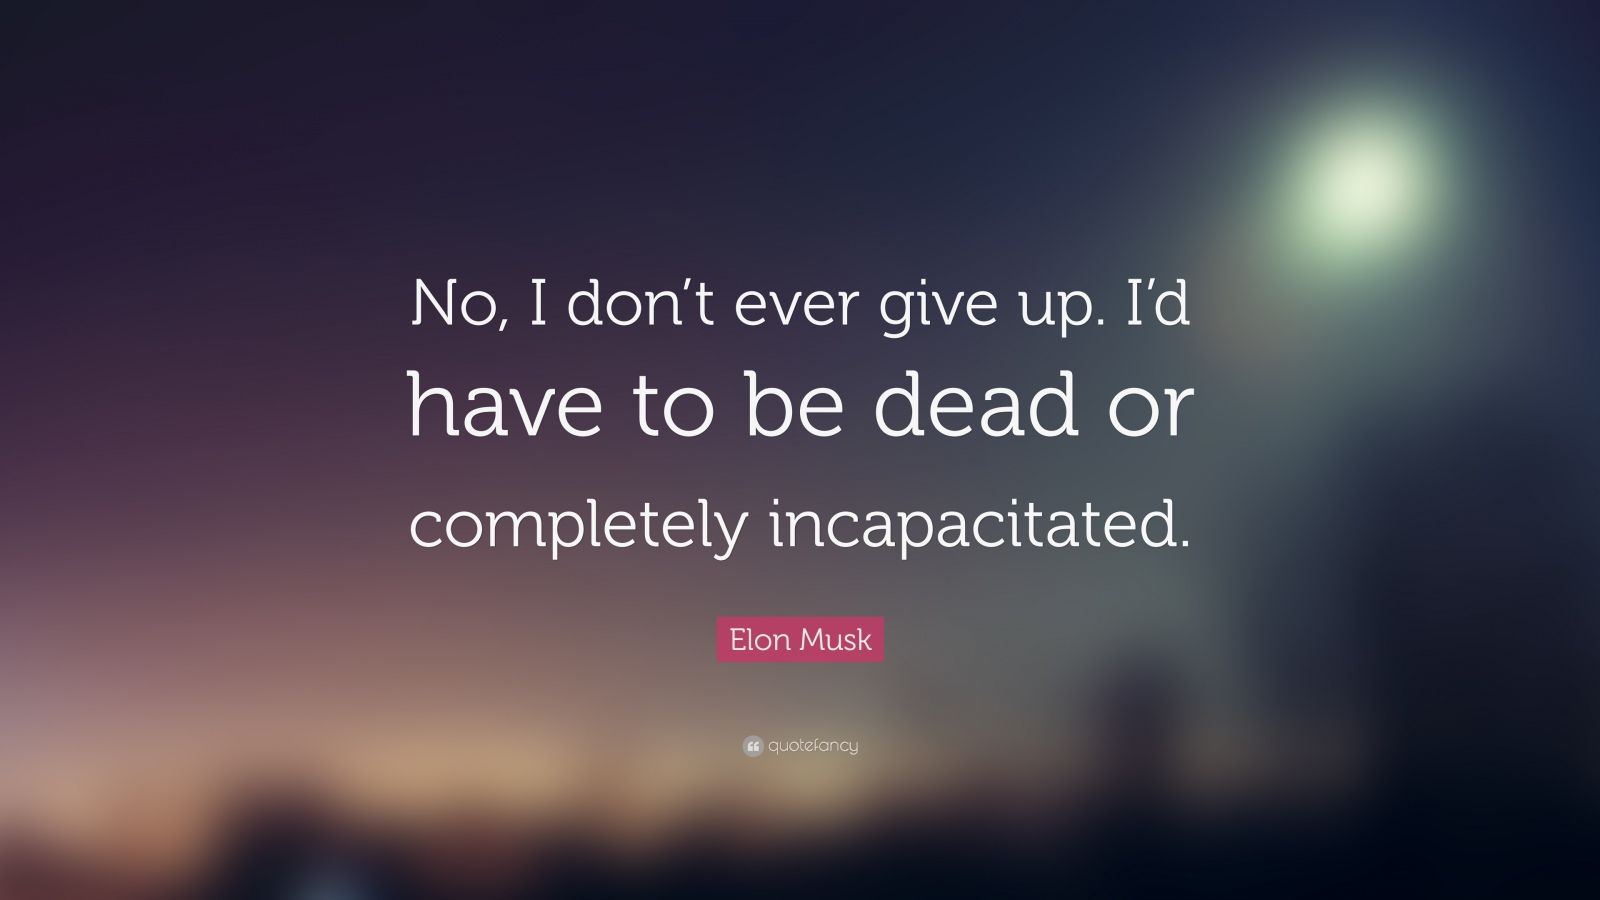 Elon Musk Quote: "No, I don't ever give up. I'd have to be dead or completely incapacitated ...